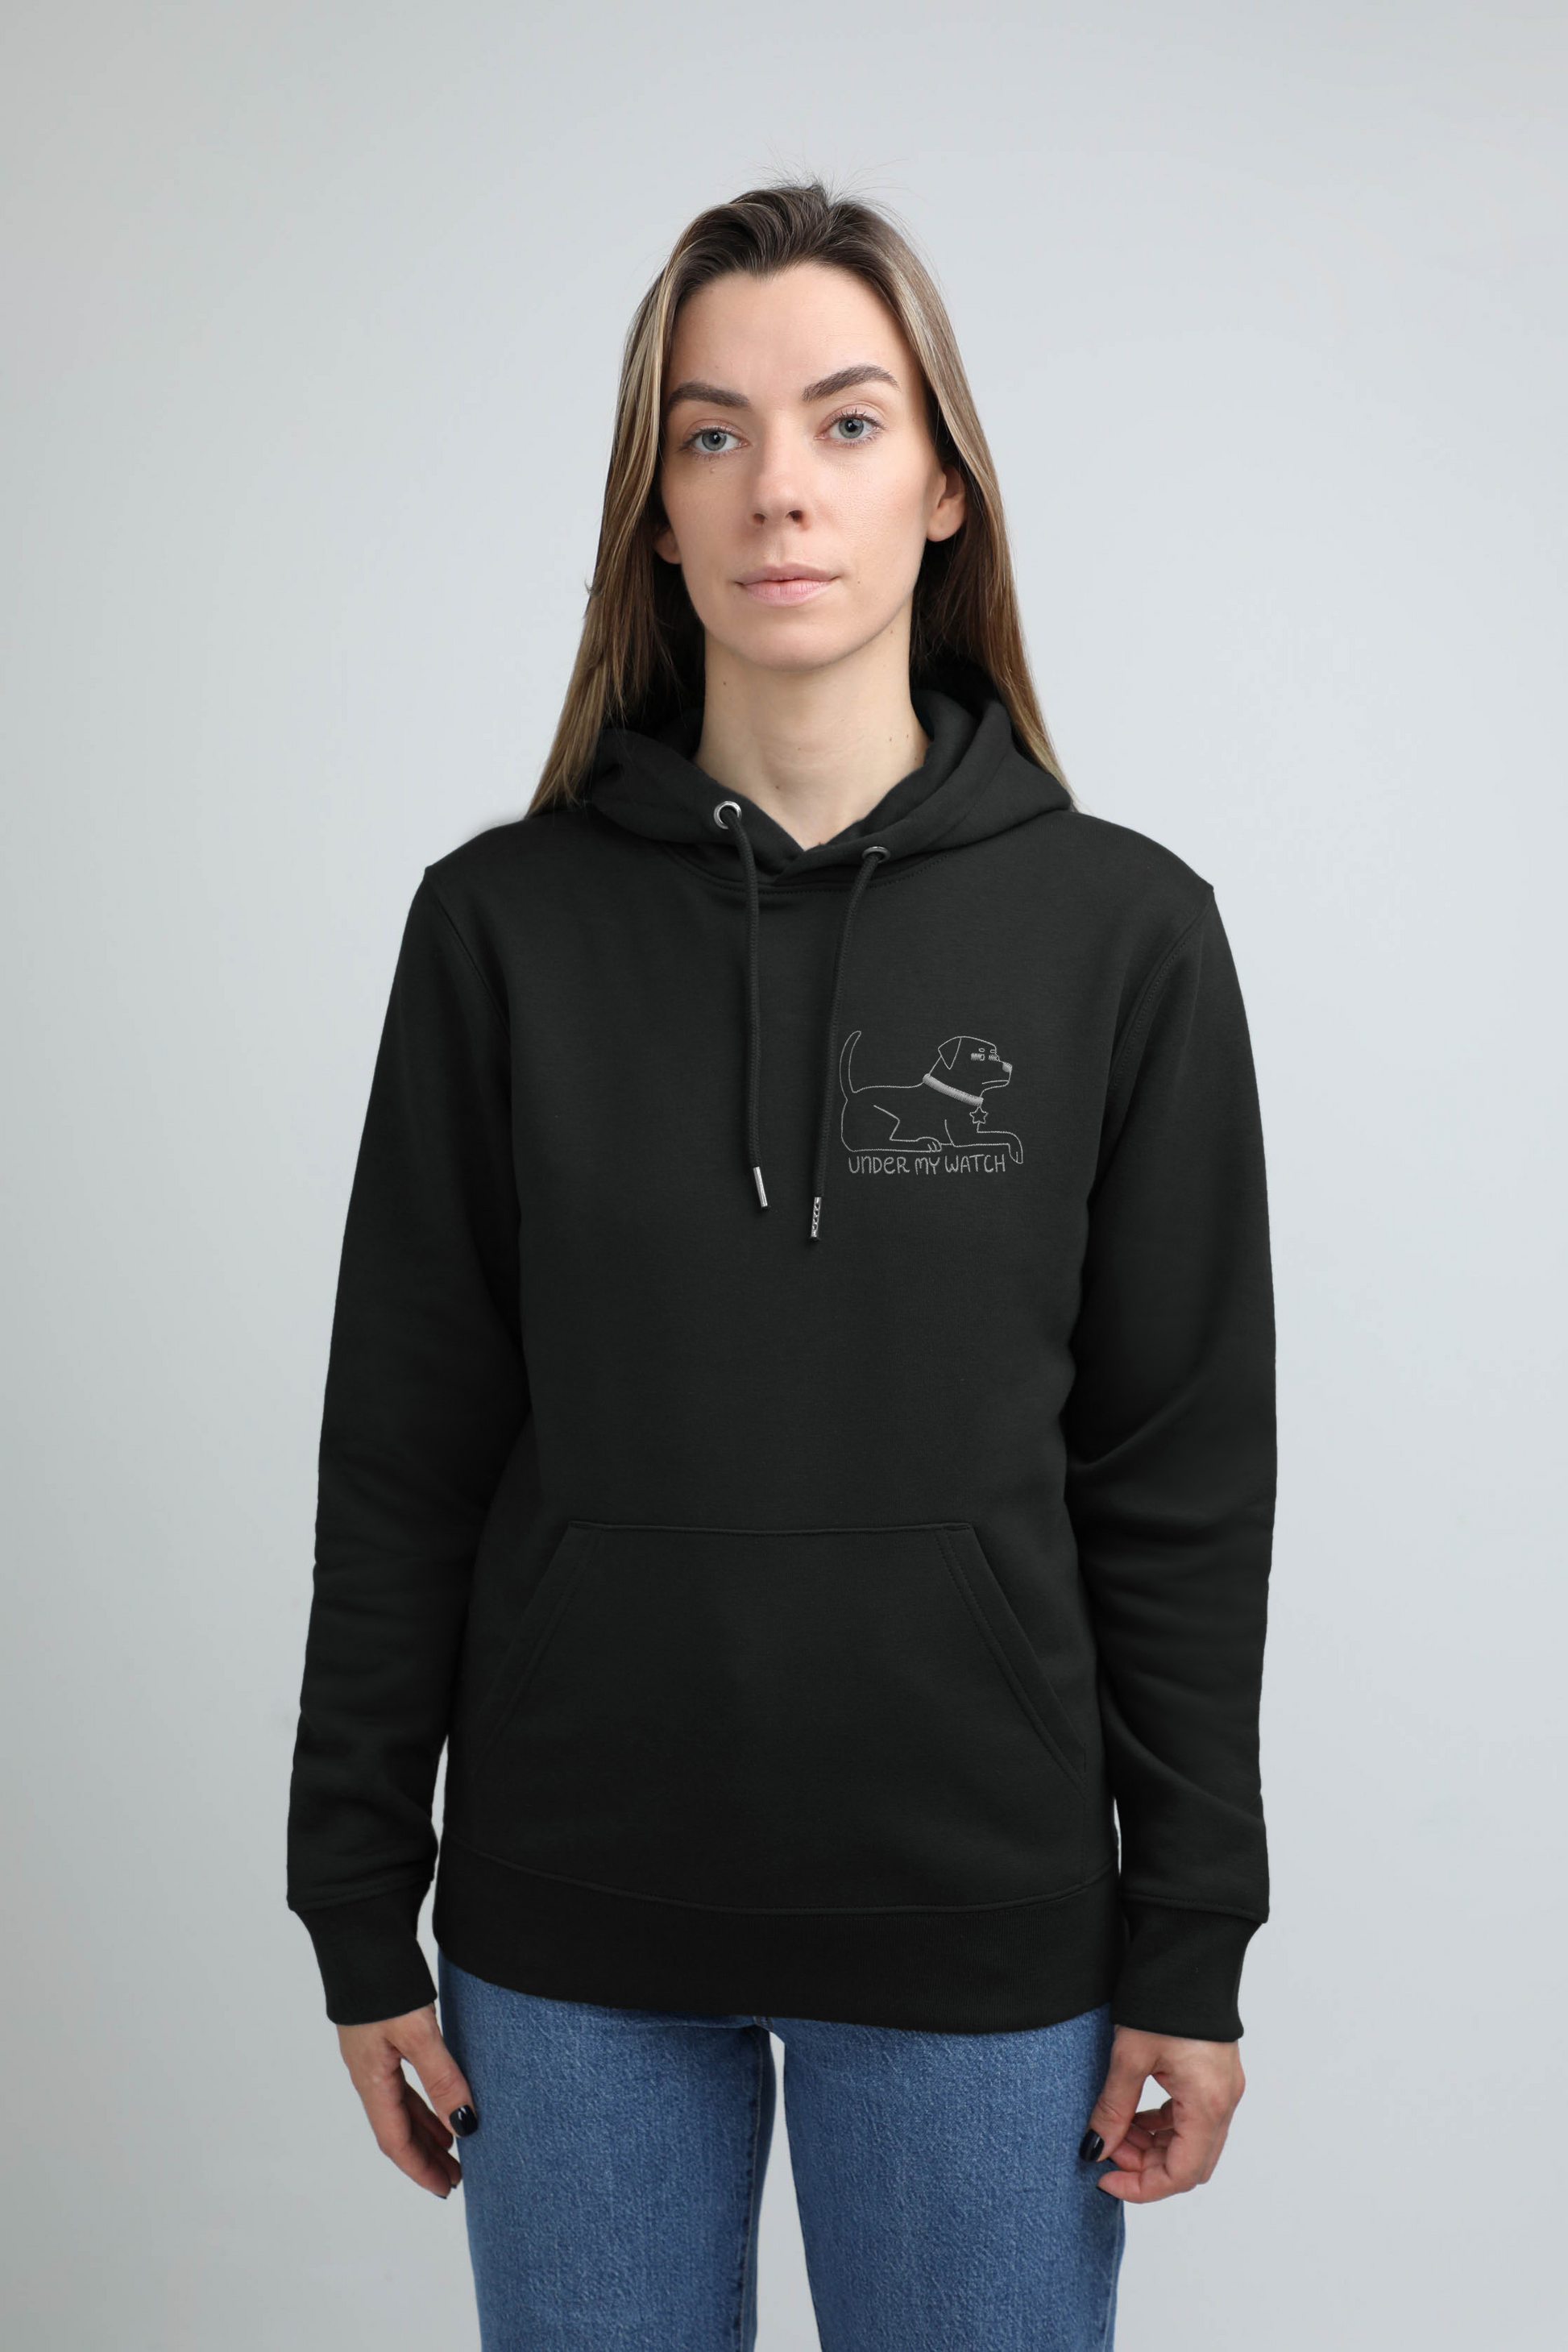 Under my watch | Hoodie with embroidered dog. Regular fit | Unisex by My Wild Other